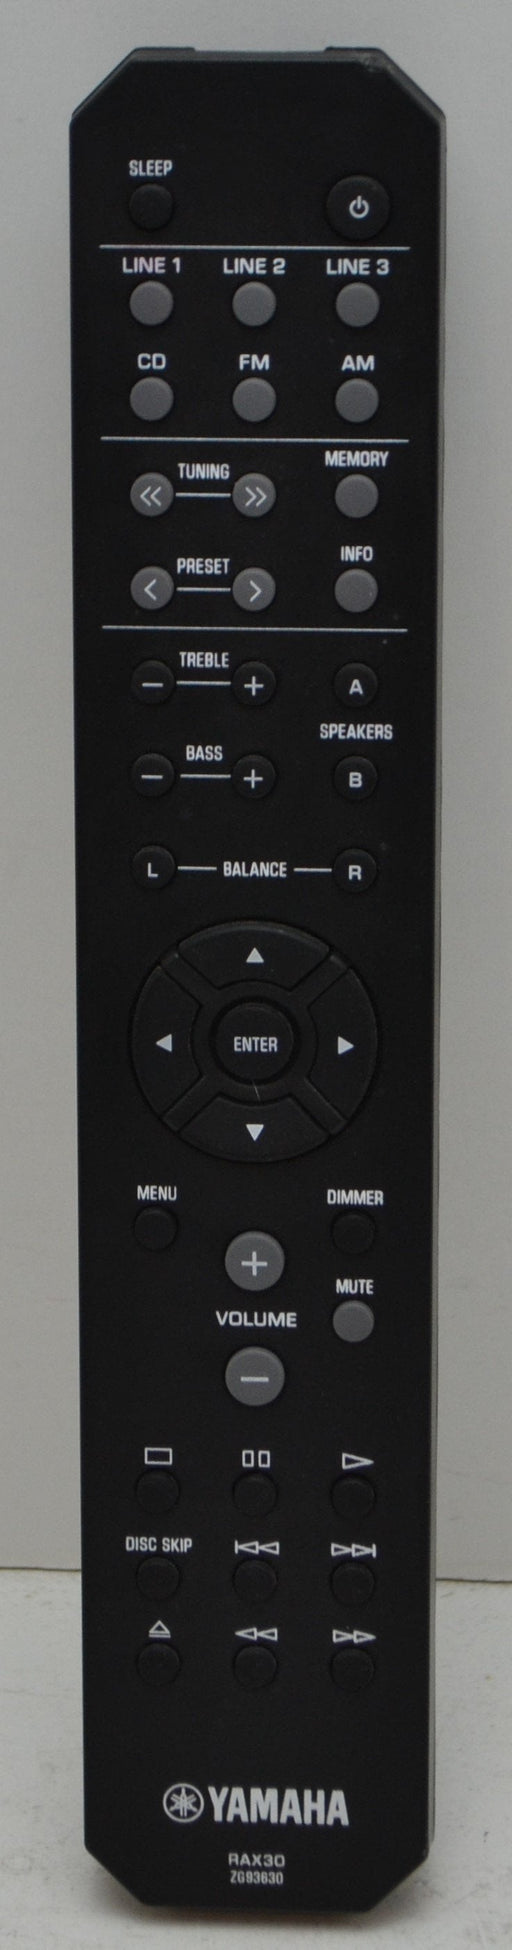 Yamaha RAX30 Remote Control for Audio Receiver R-S201 and More-Remote-SpenCertified-refurbished-vintage-electonics